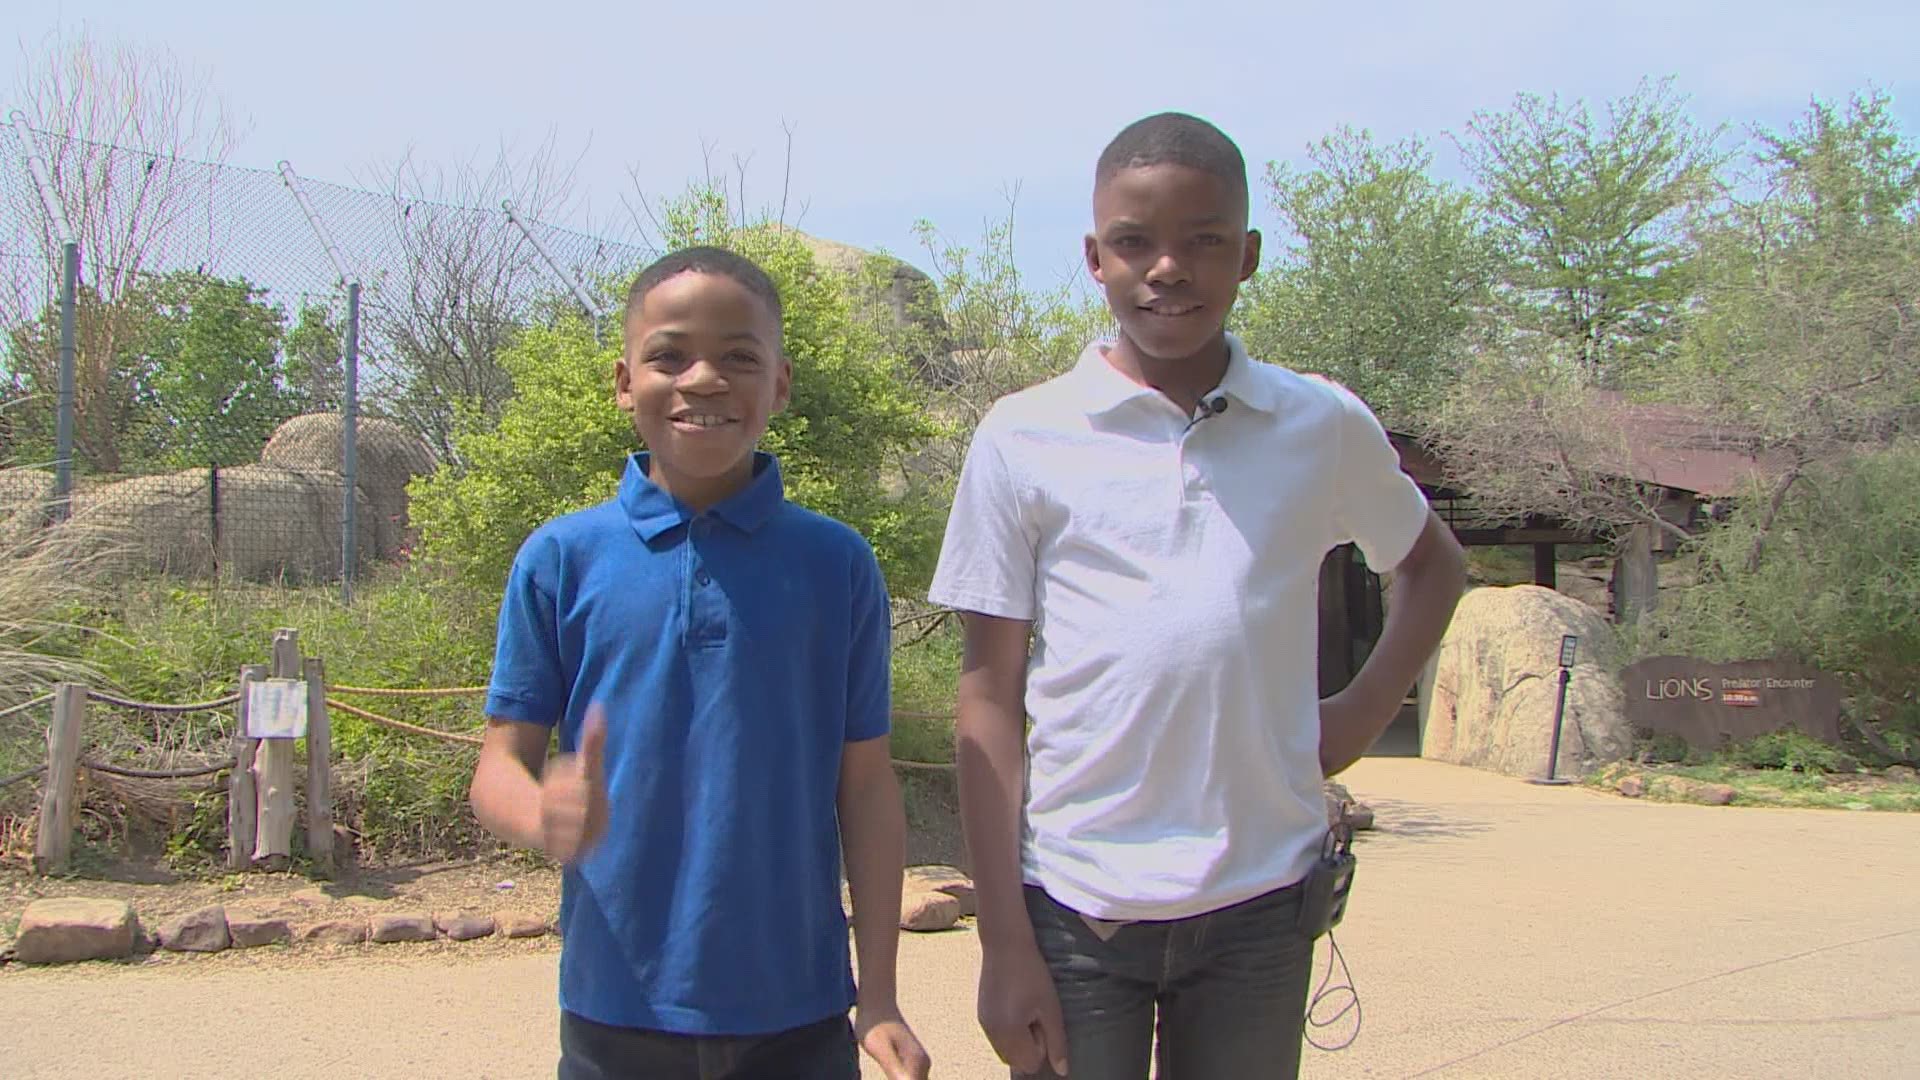 Almost three years in foster care have taught Draylon and Derrick not to be afraid of their situation, but rather, to rely on each other.